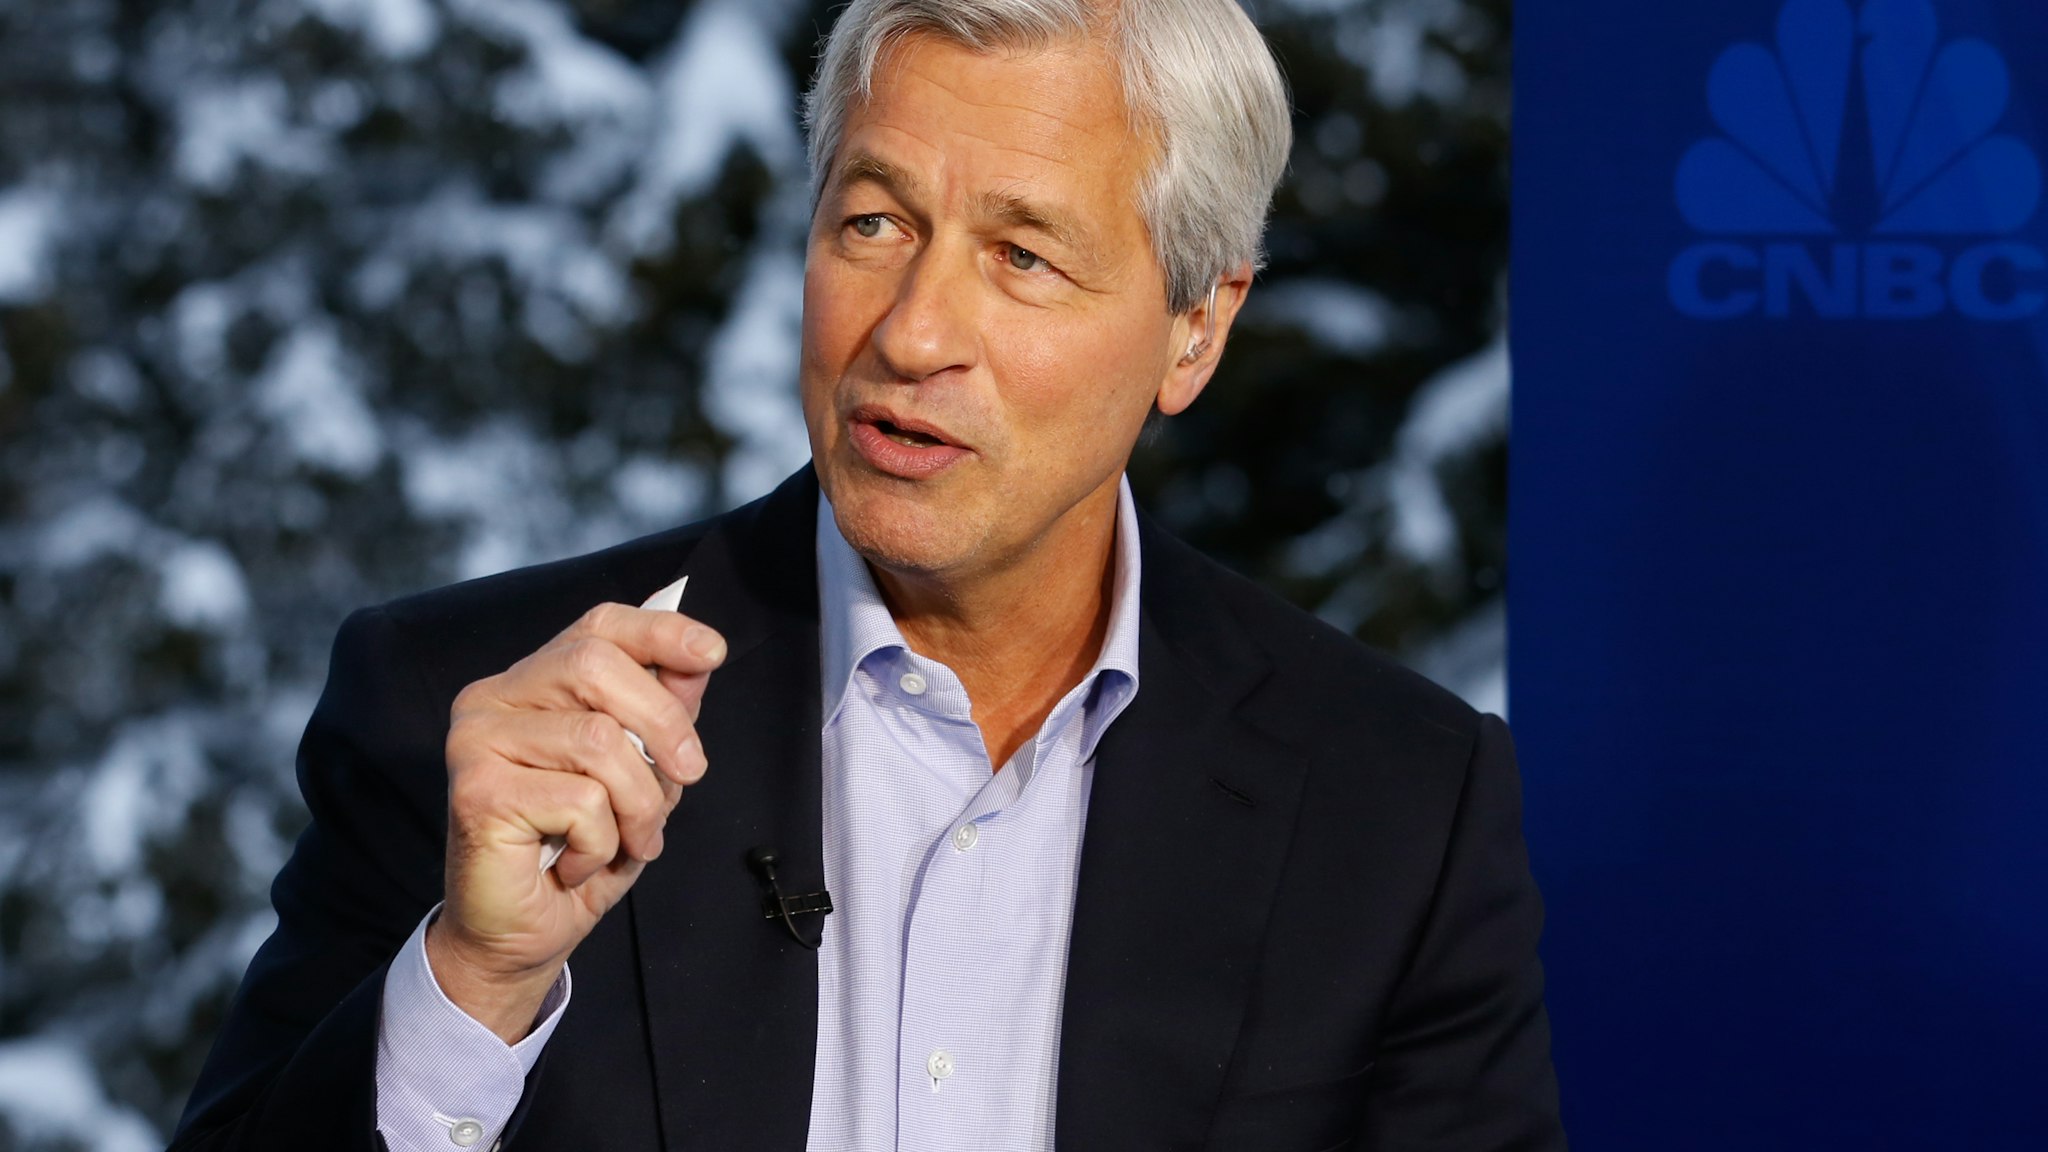 DAVOS 2016; World Economic Forum -- Pictured: Jamie Dimon, chairman, president and CEO of JP Morgan Chase, in an interview at the annual World Economic Forum in Davos, Switzerland, on January 20, 2016